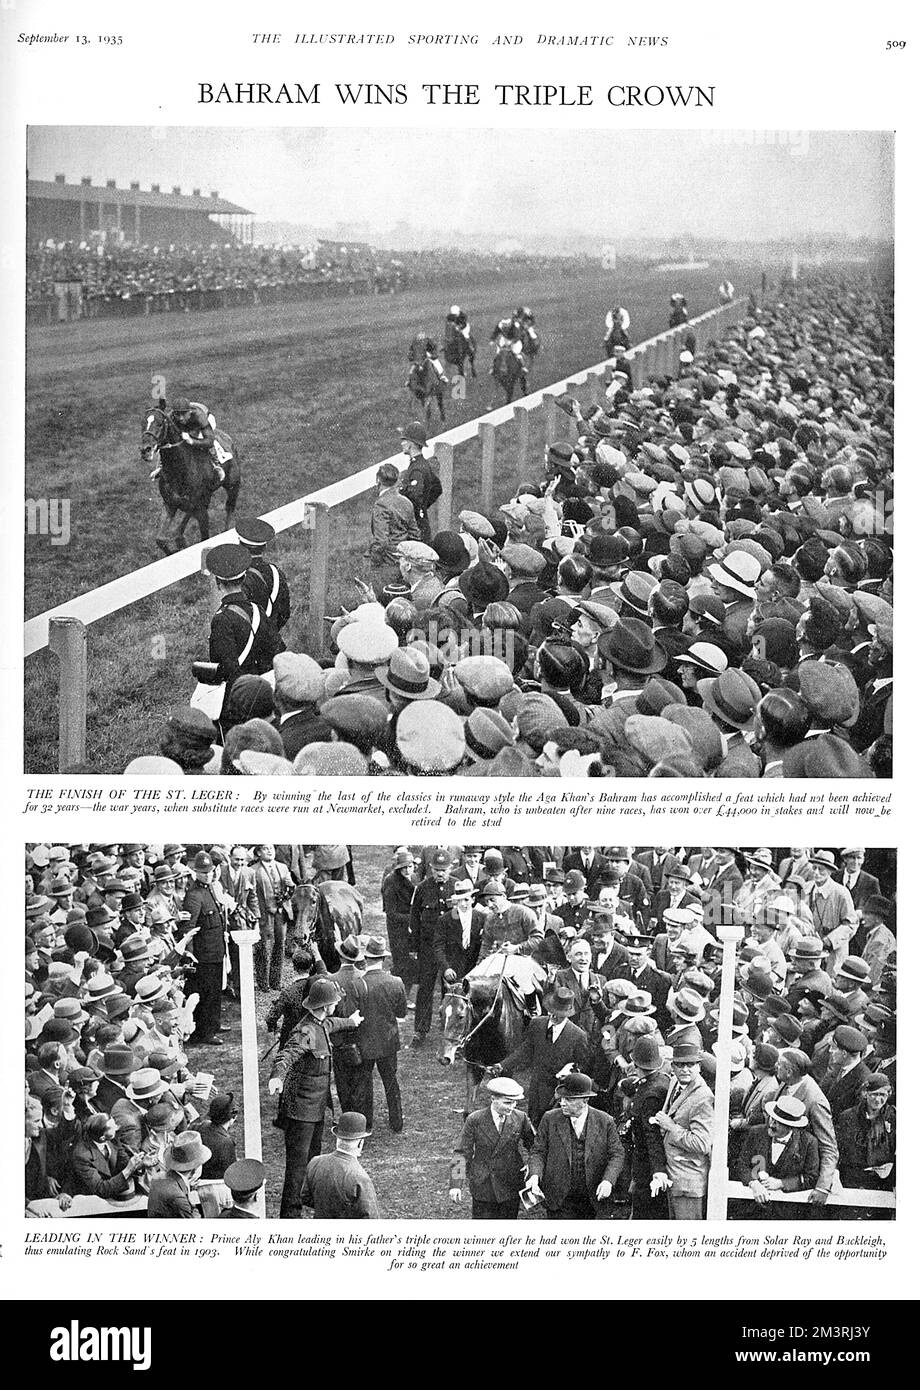 Racehorse Bahram pictured at the finish of the St. Leger, with prince Aly Khan pictured below leading his father's horse after its win.     Date: 1935 Stock Photo